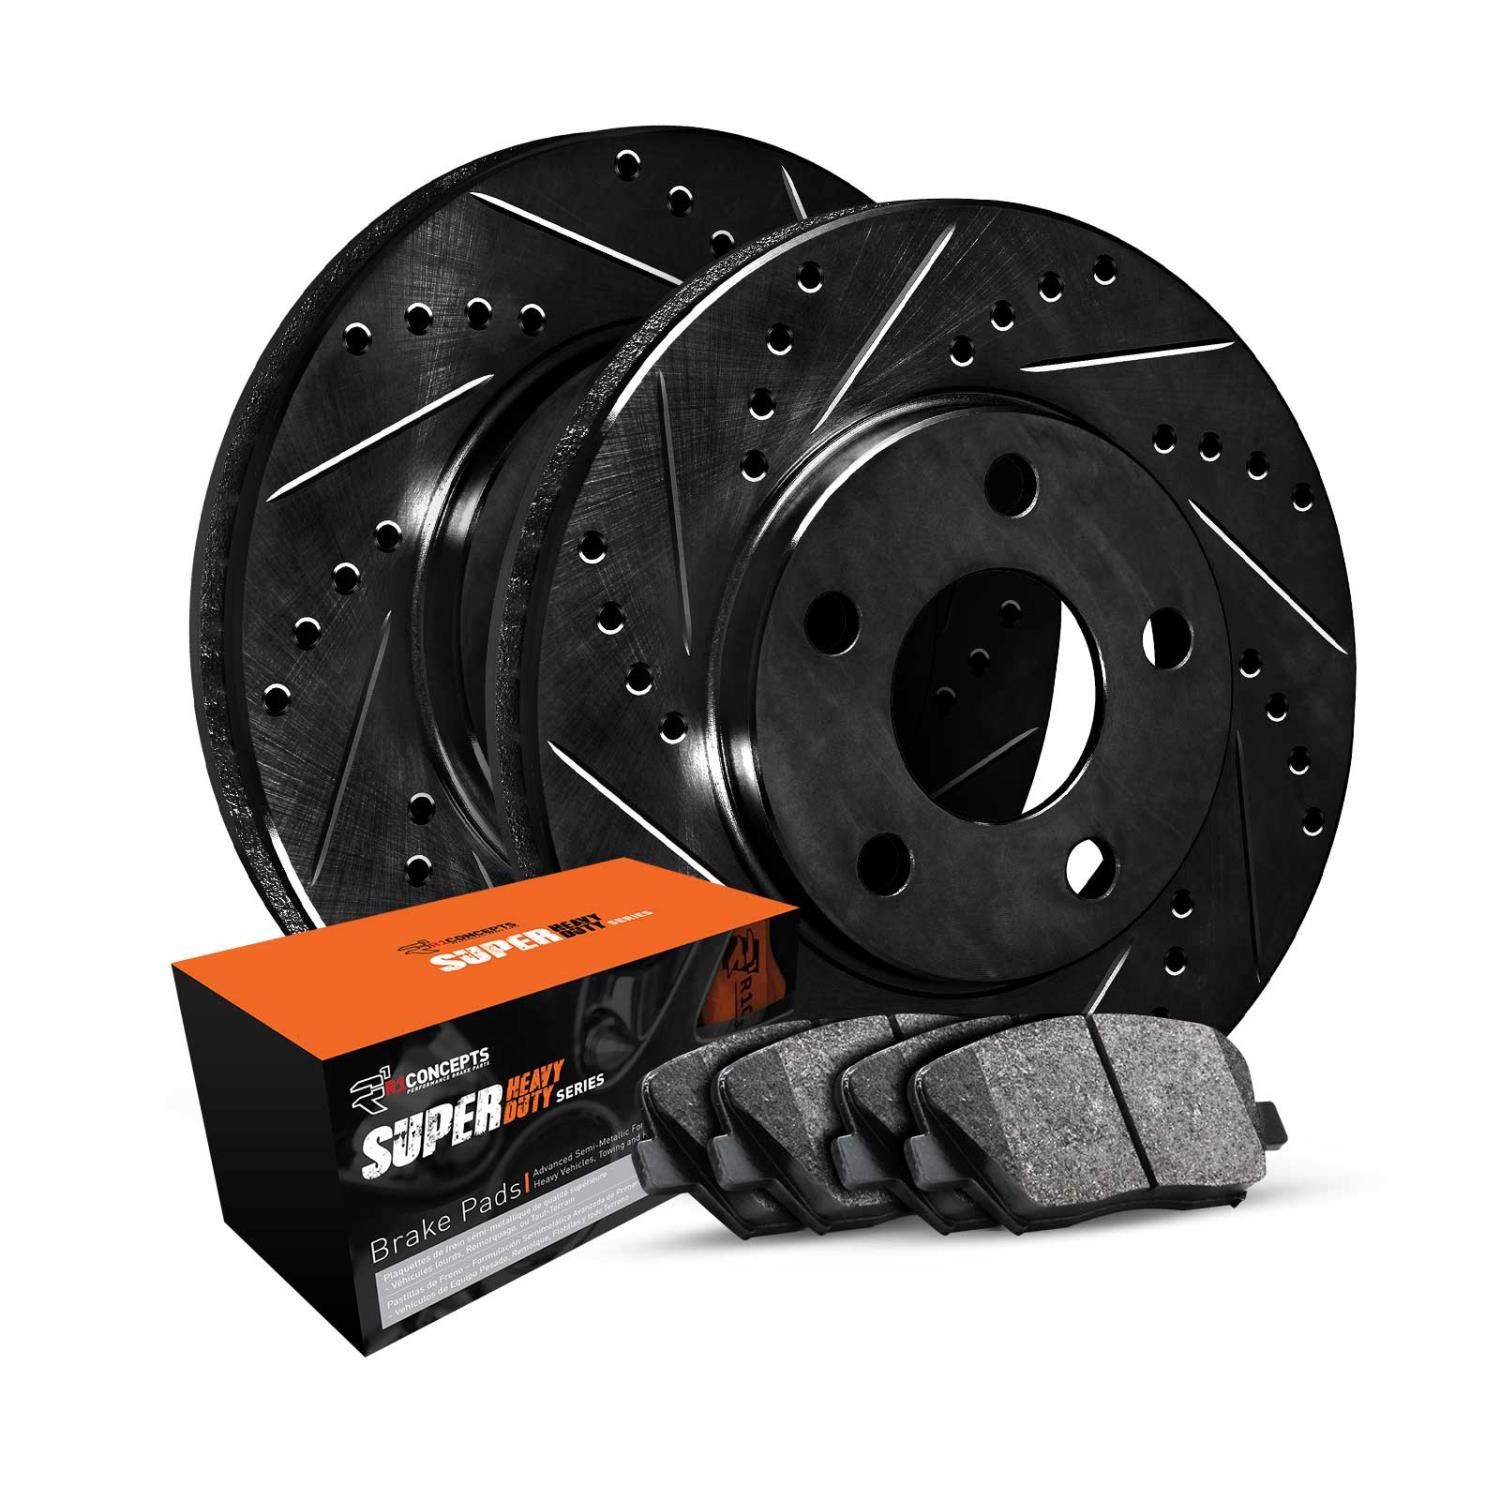 E-Line Drilled & Slotted Black Brake Rotor Set w/Super-Duty Pads, Fits Select Fits Multiple Makes/Models, Position: Front & Rear